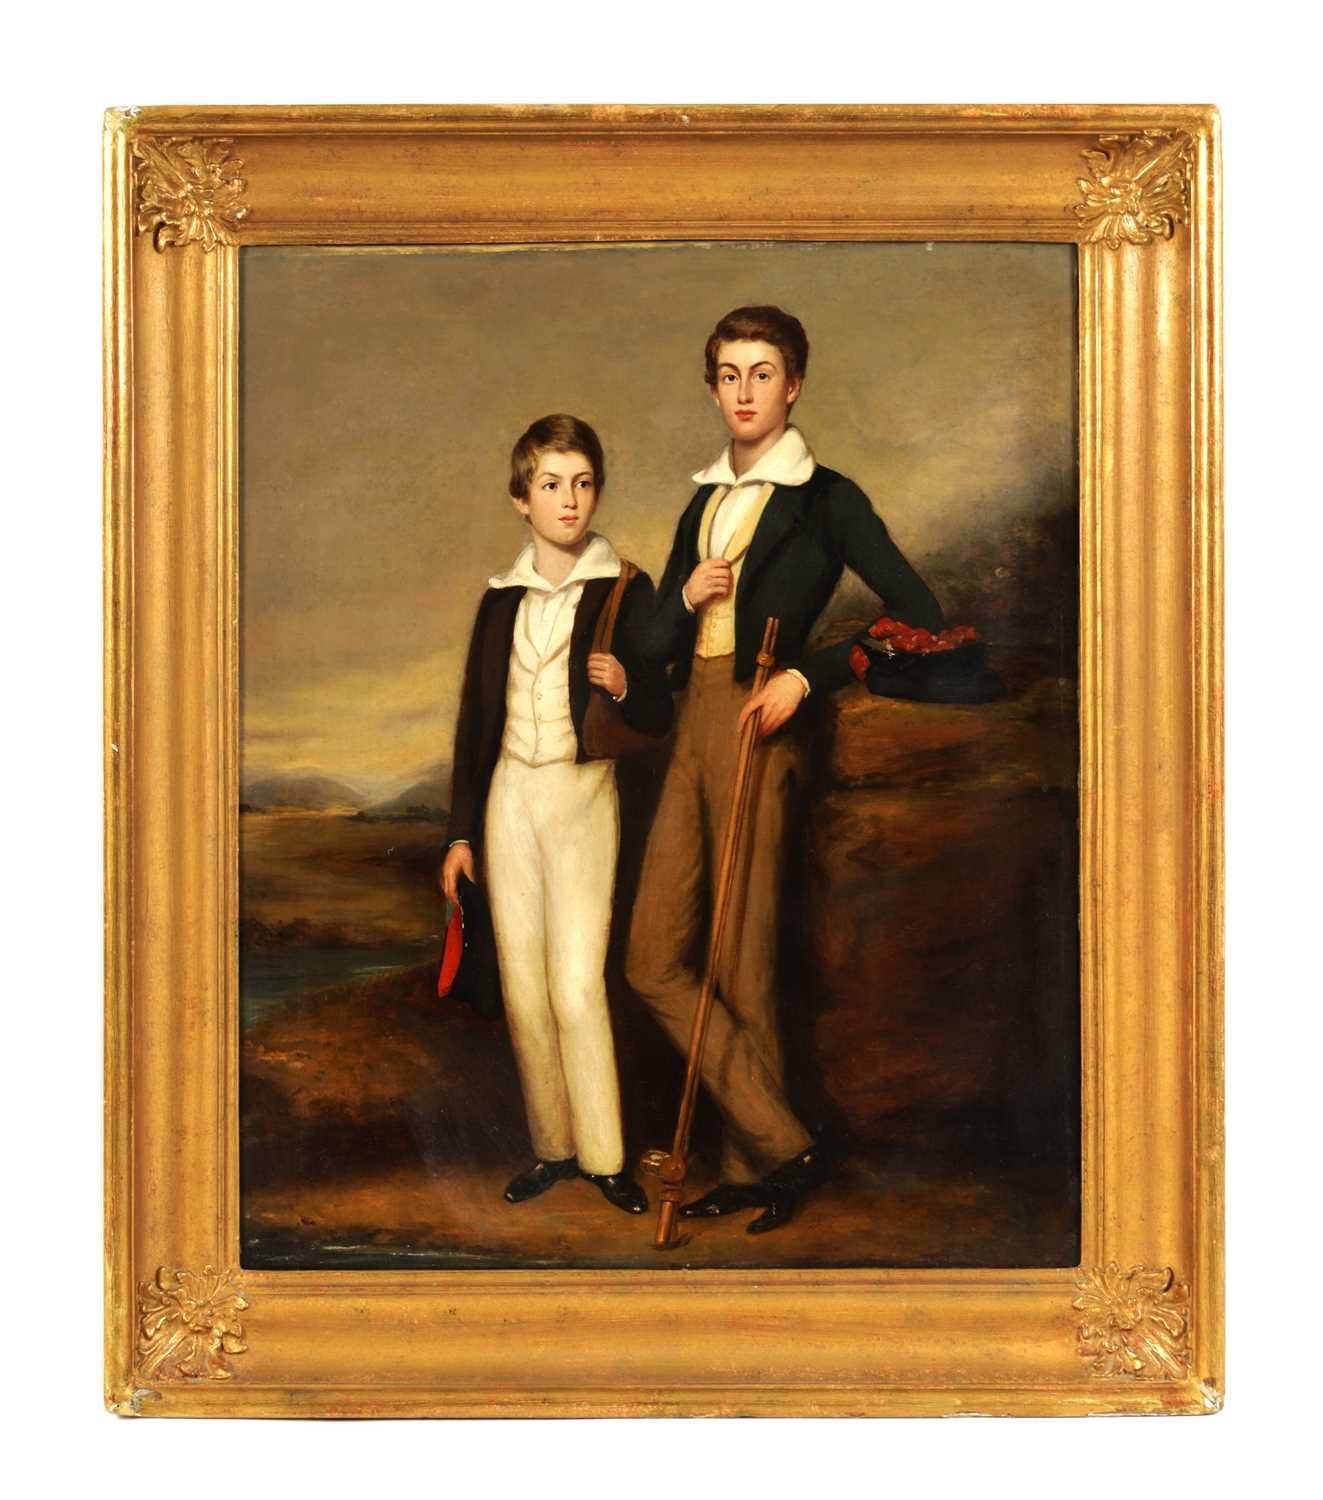 Lot 421 - ATTRIBUTED TO ANDREW GEDDES (1783-1844)  19TH CENTURY OIL ON CANVAS - FULL-LENGTH PORTRAIT OF TWO BOYS